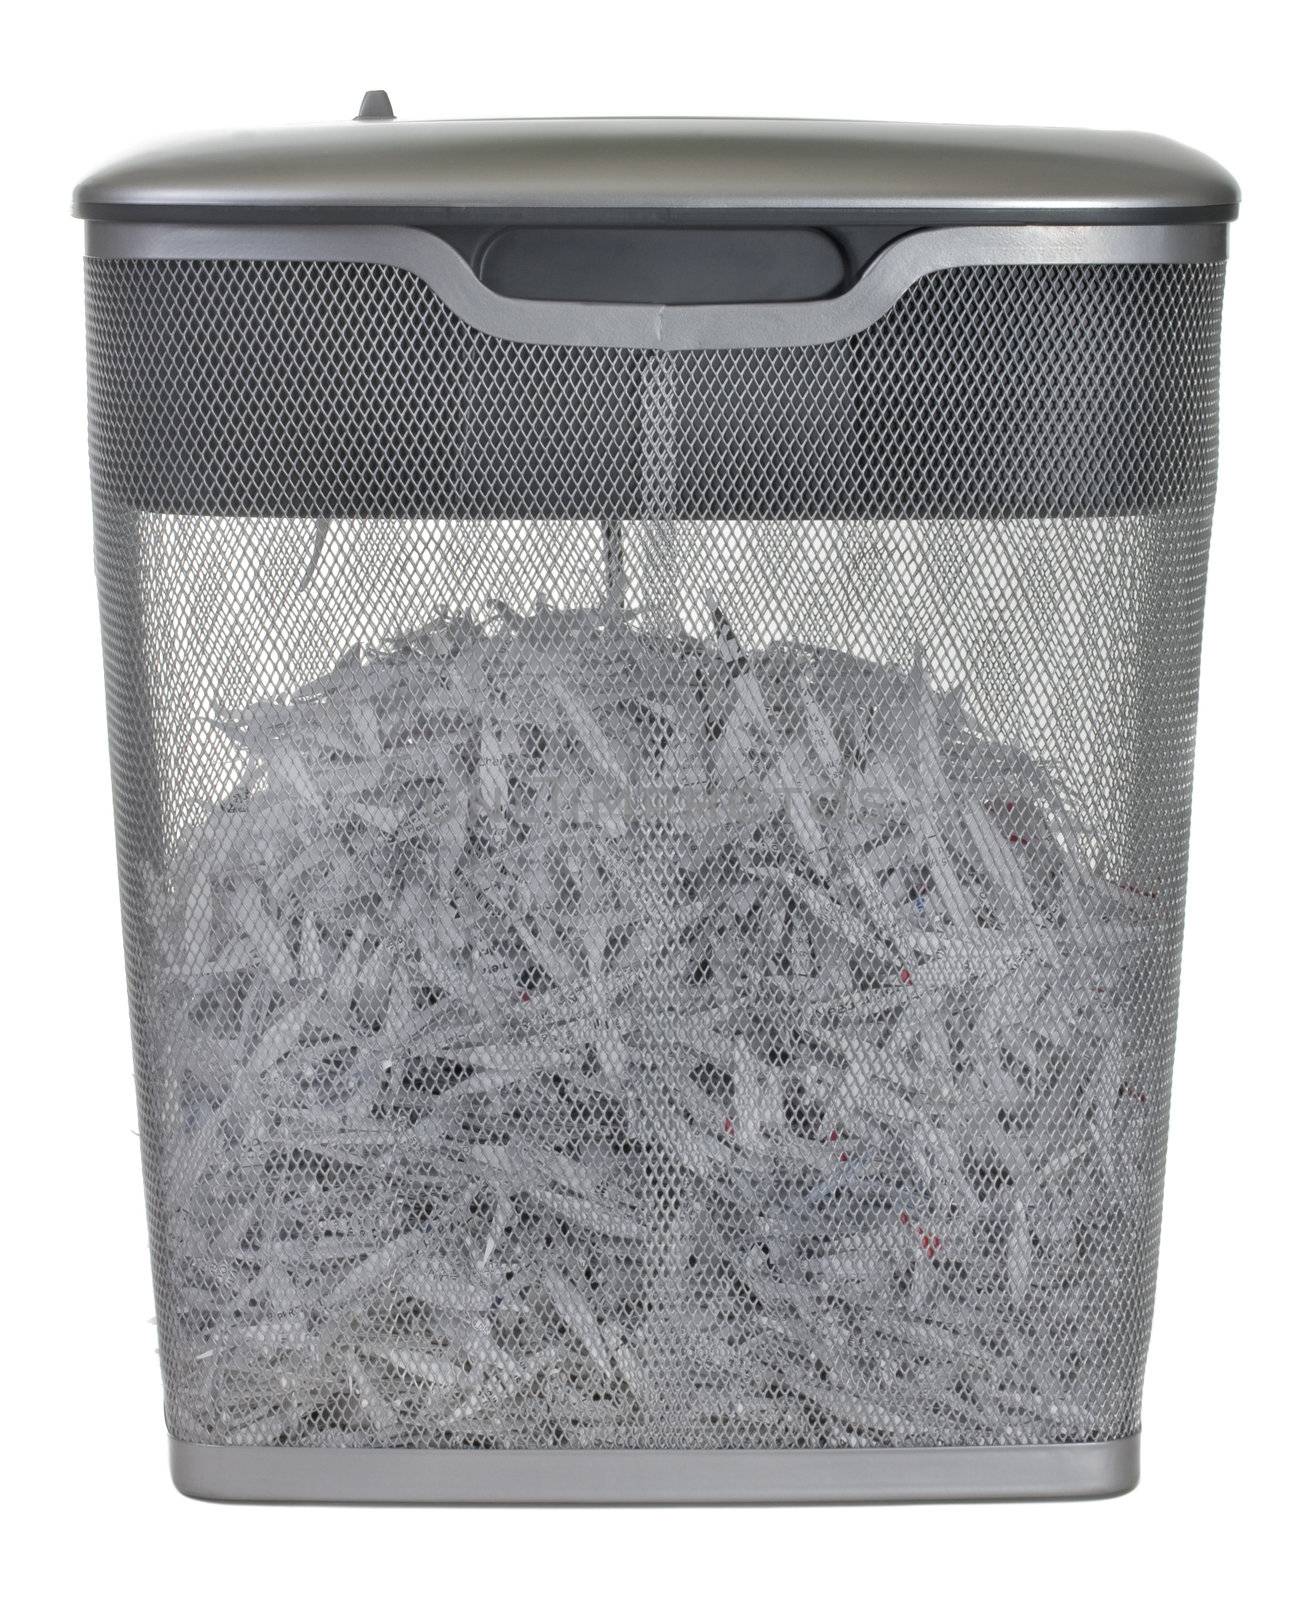 light duty paper shredder with metal wire basket filled with document shreddings, isolated on white